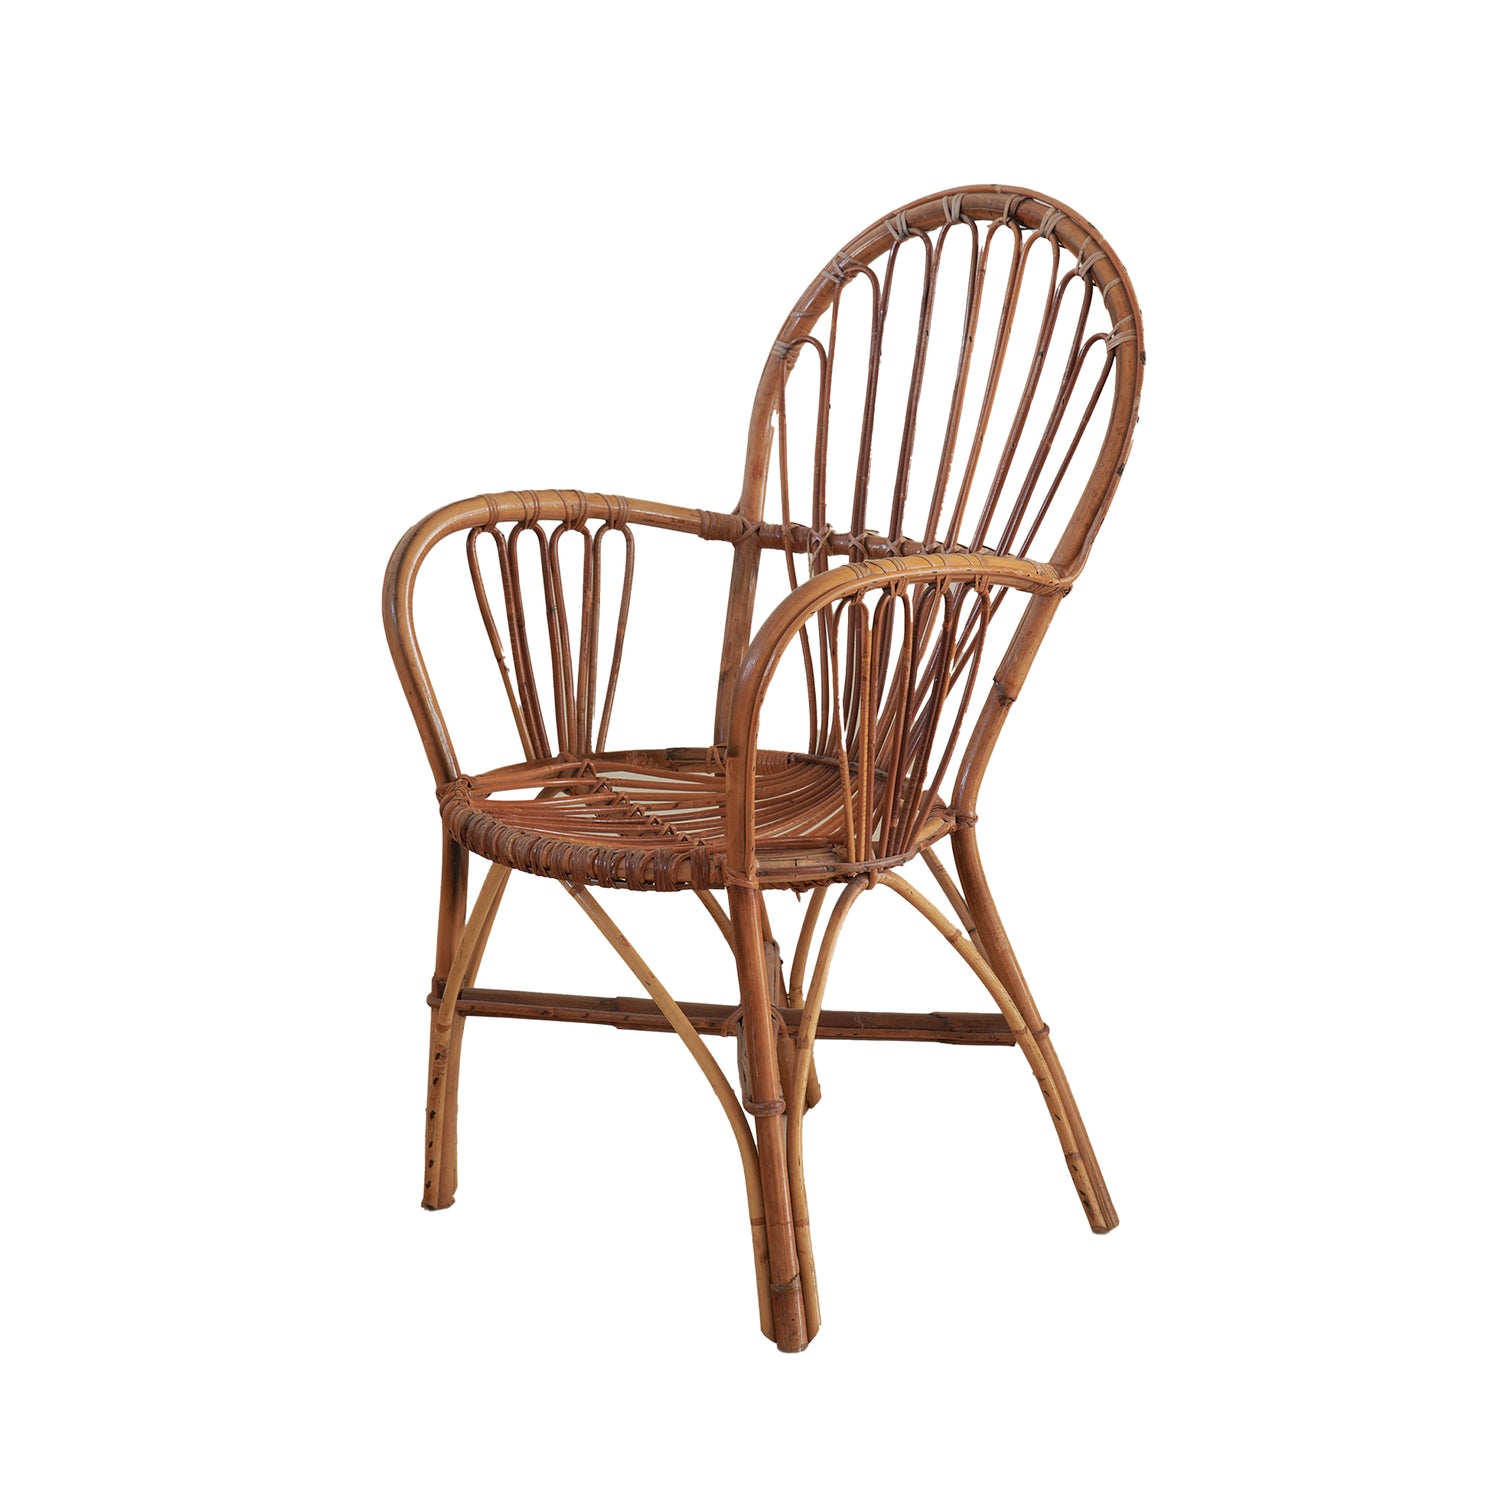 Vintage Bamboo Chair with Arm